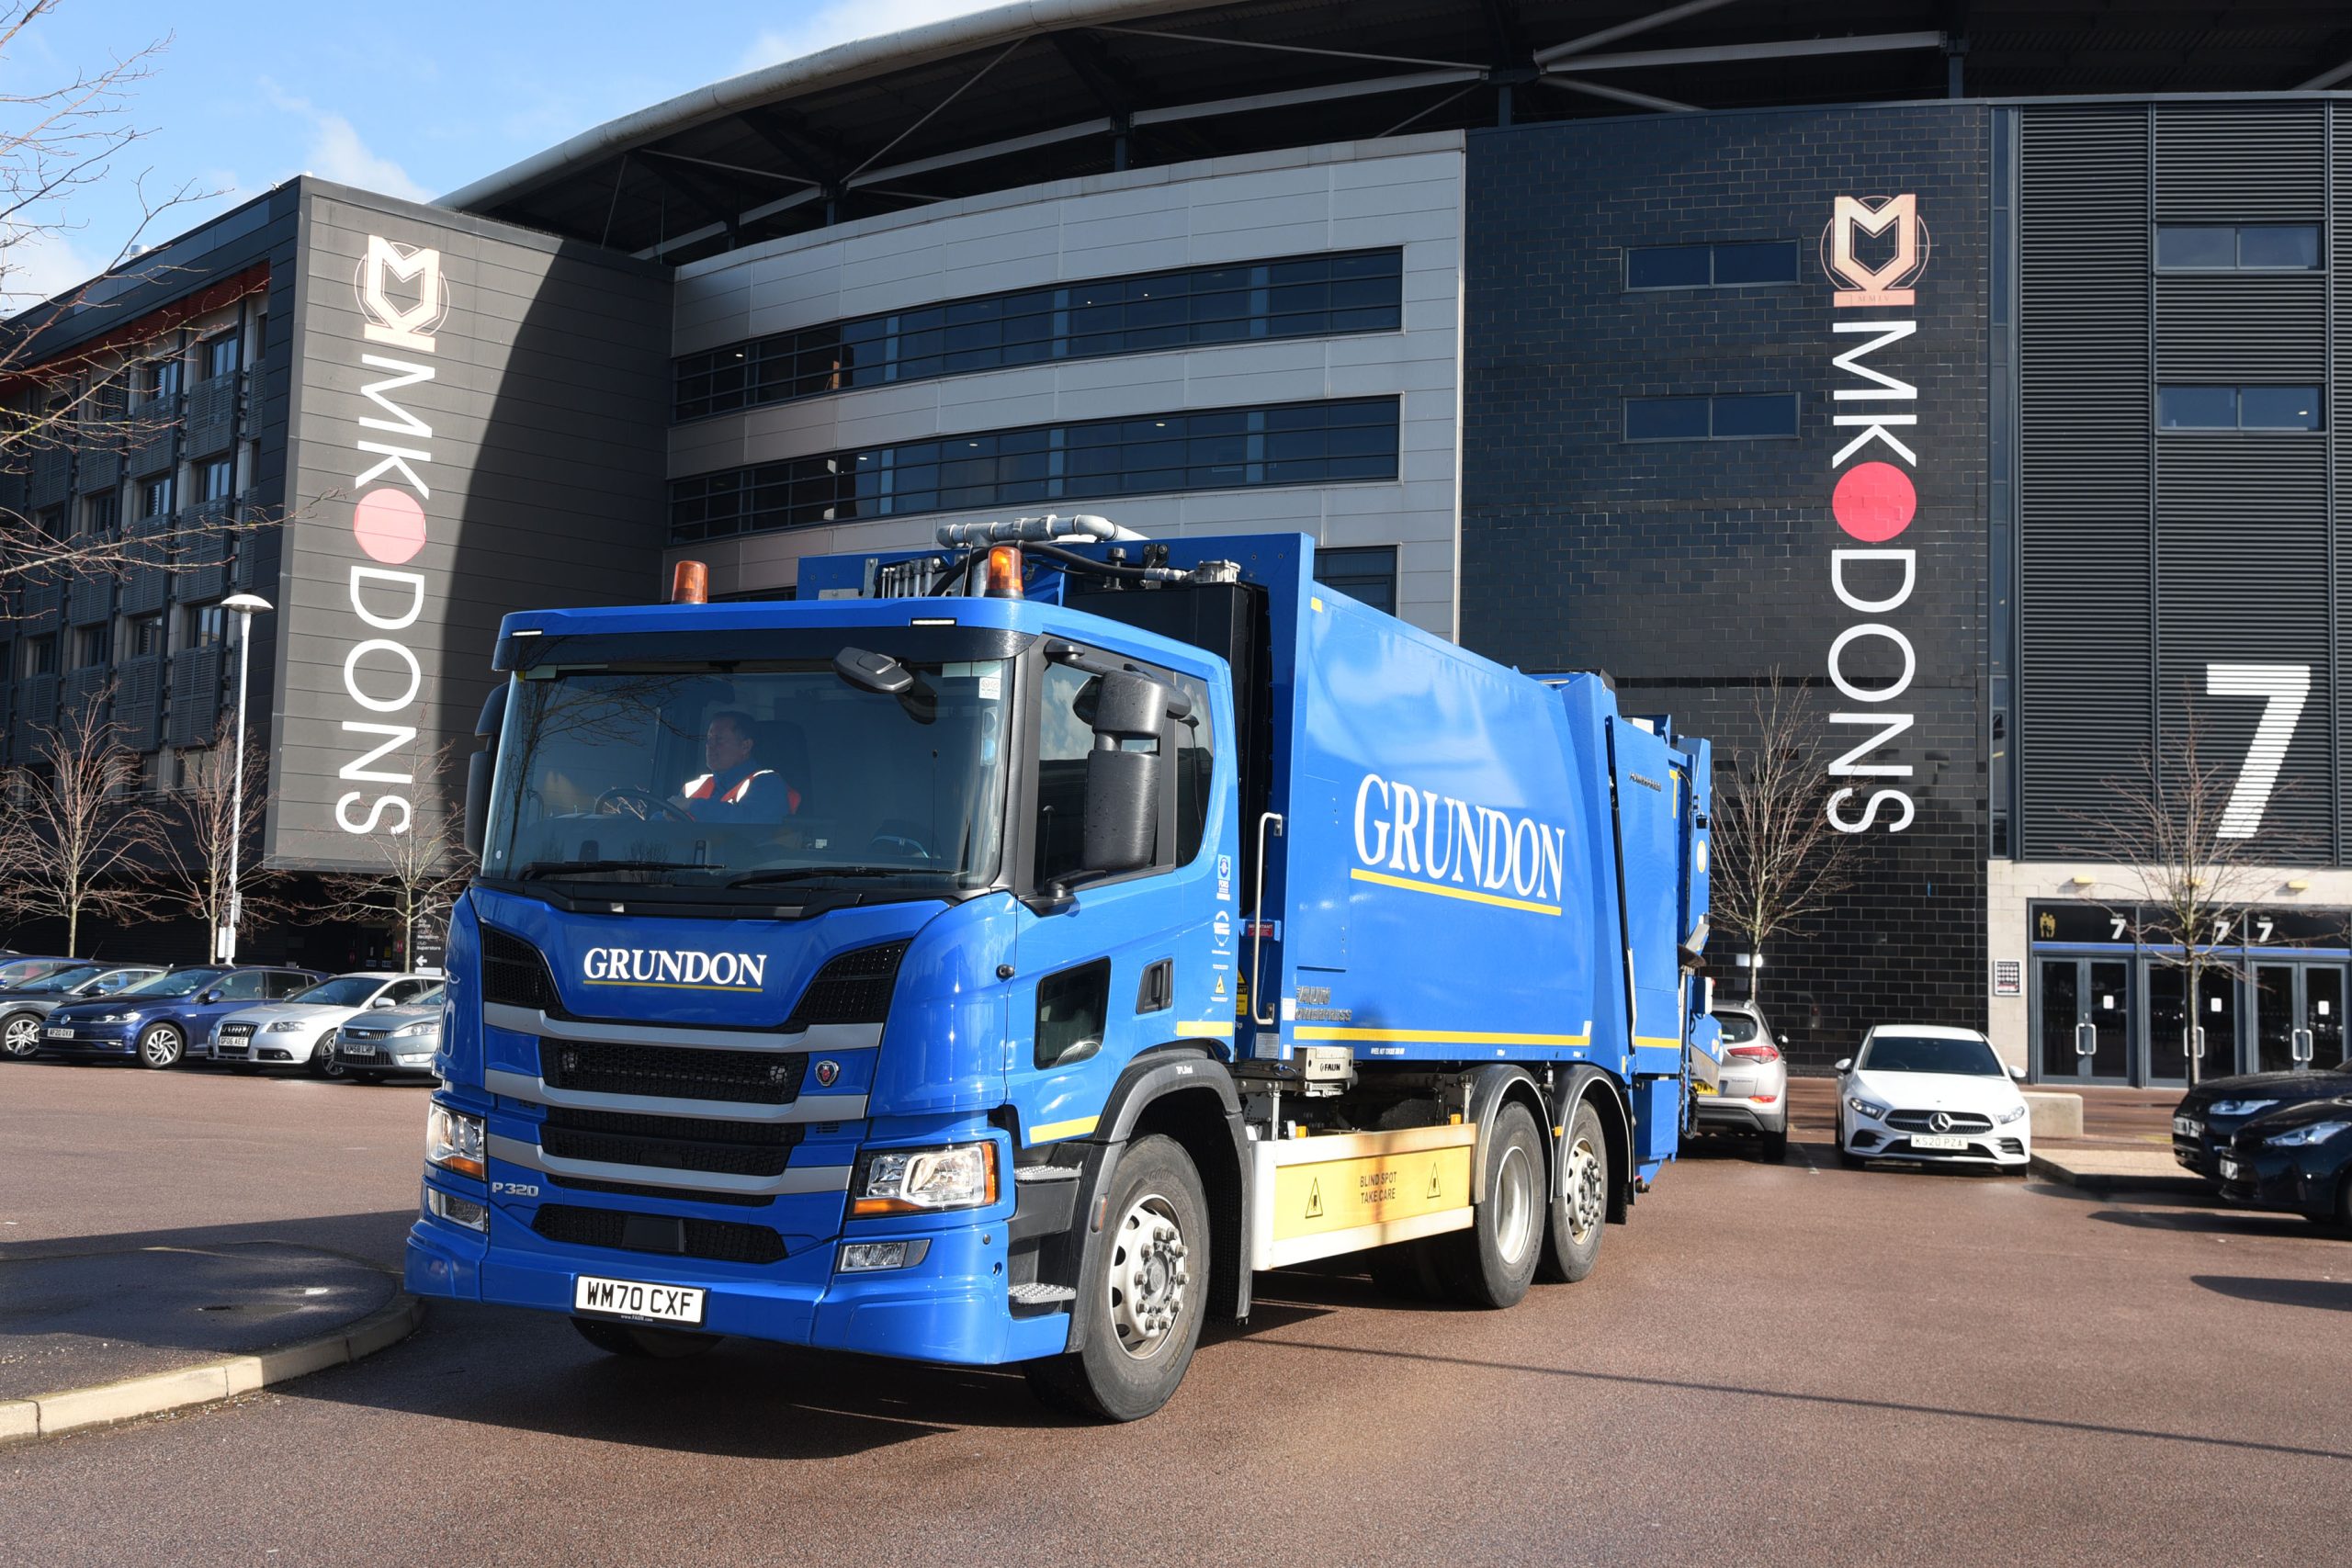 Grundon has secured a new five-year contract to manage the waste at the Stadium MK complex